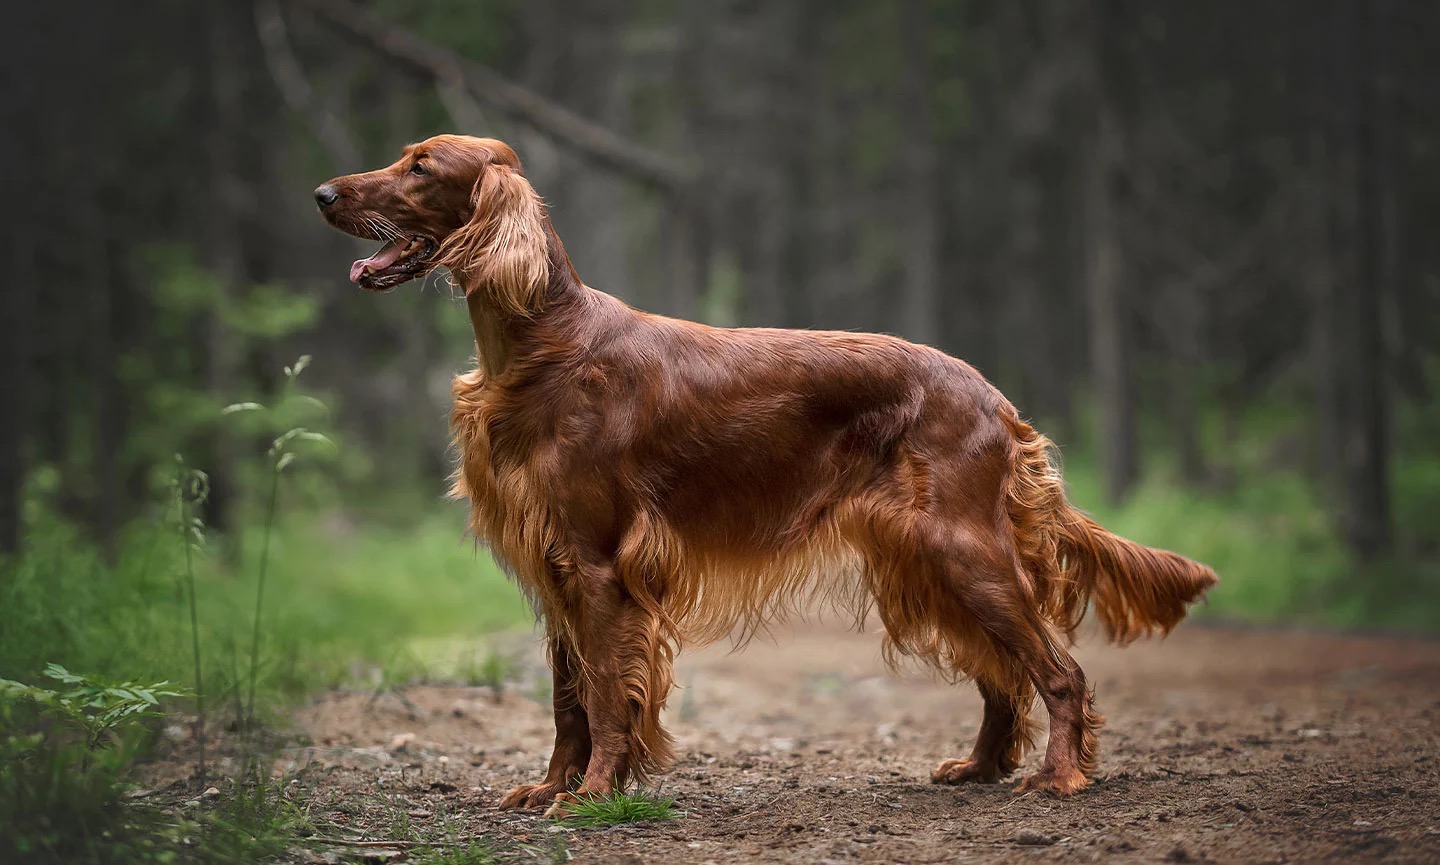 Can You Pass This Geography Quiz Where Every Question Comes With a 🐶 Dog-Related Clue? Irish Setter